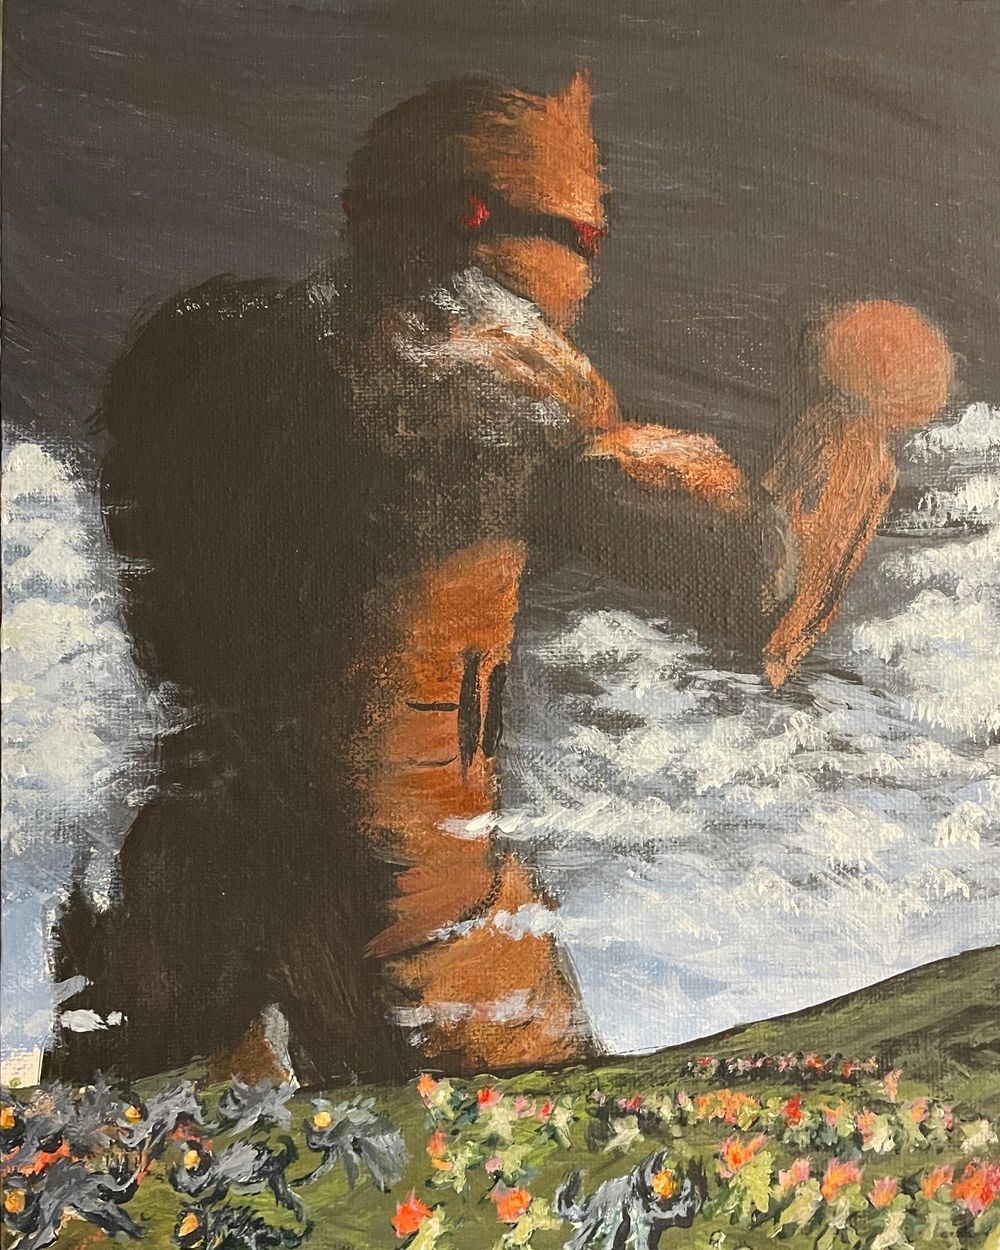 "The Colossi" (2022) - painting by spaceseer. Original artwork, inspired by the perspective of "The Colossus" by Francisco Goya